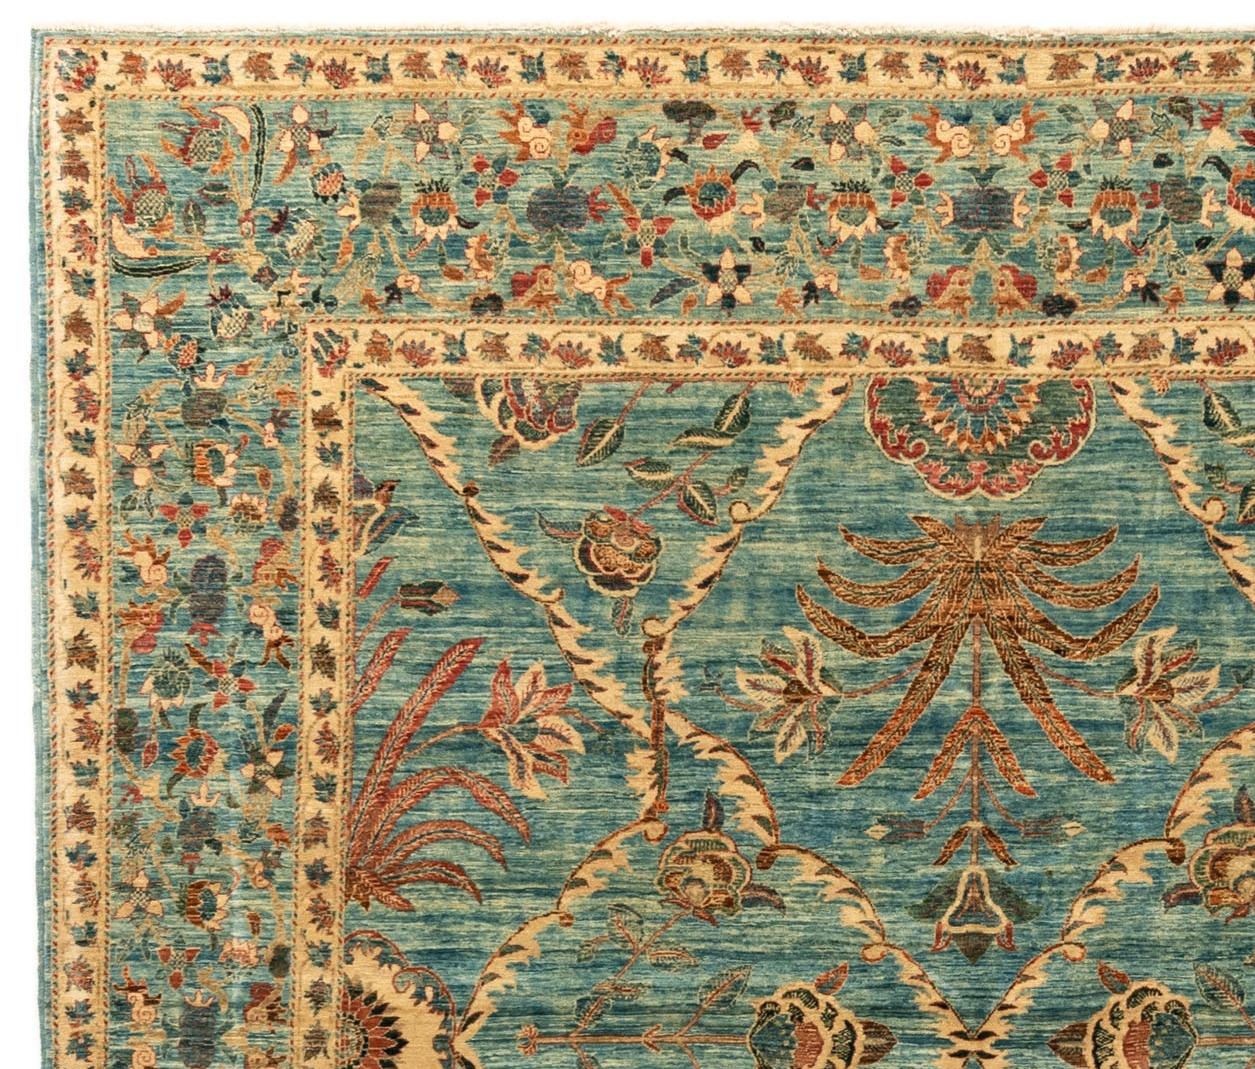 This newly woven square, room-size rug features a delicate floral design against a blue field. The abrash (irregularly dyed yarn) of the field gives a worn, antique appearance. Handwoven in Afghanistan.